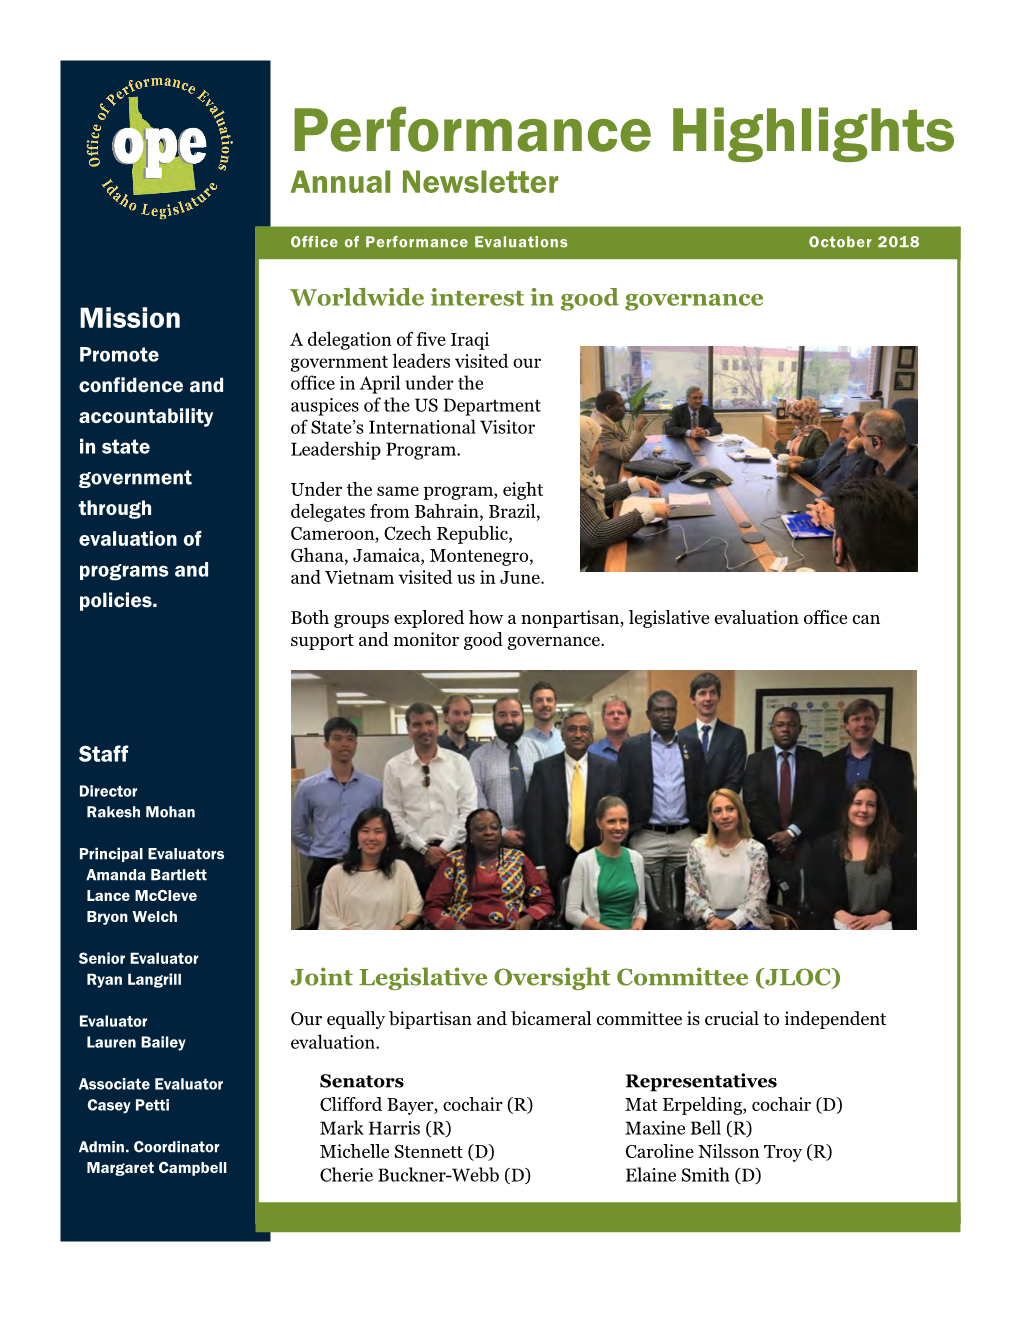 Performance Highlights Annual Newsletter